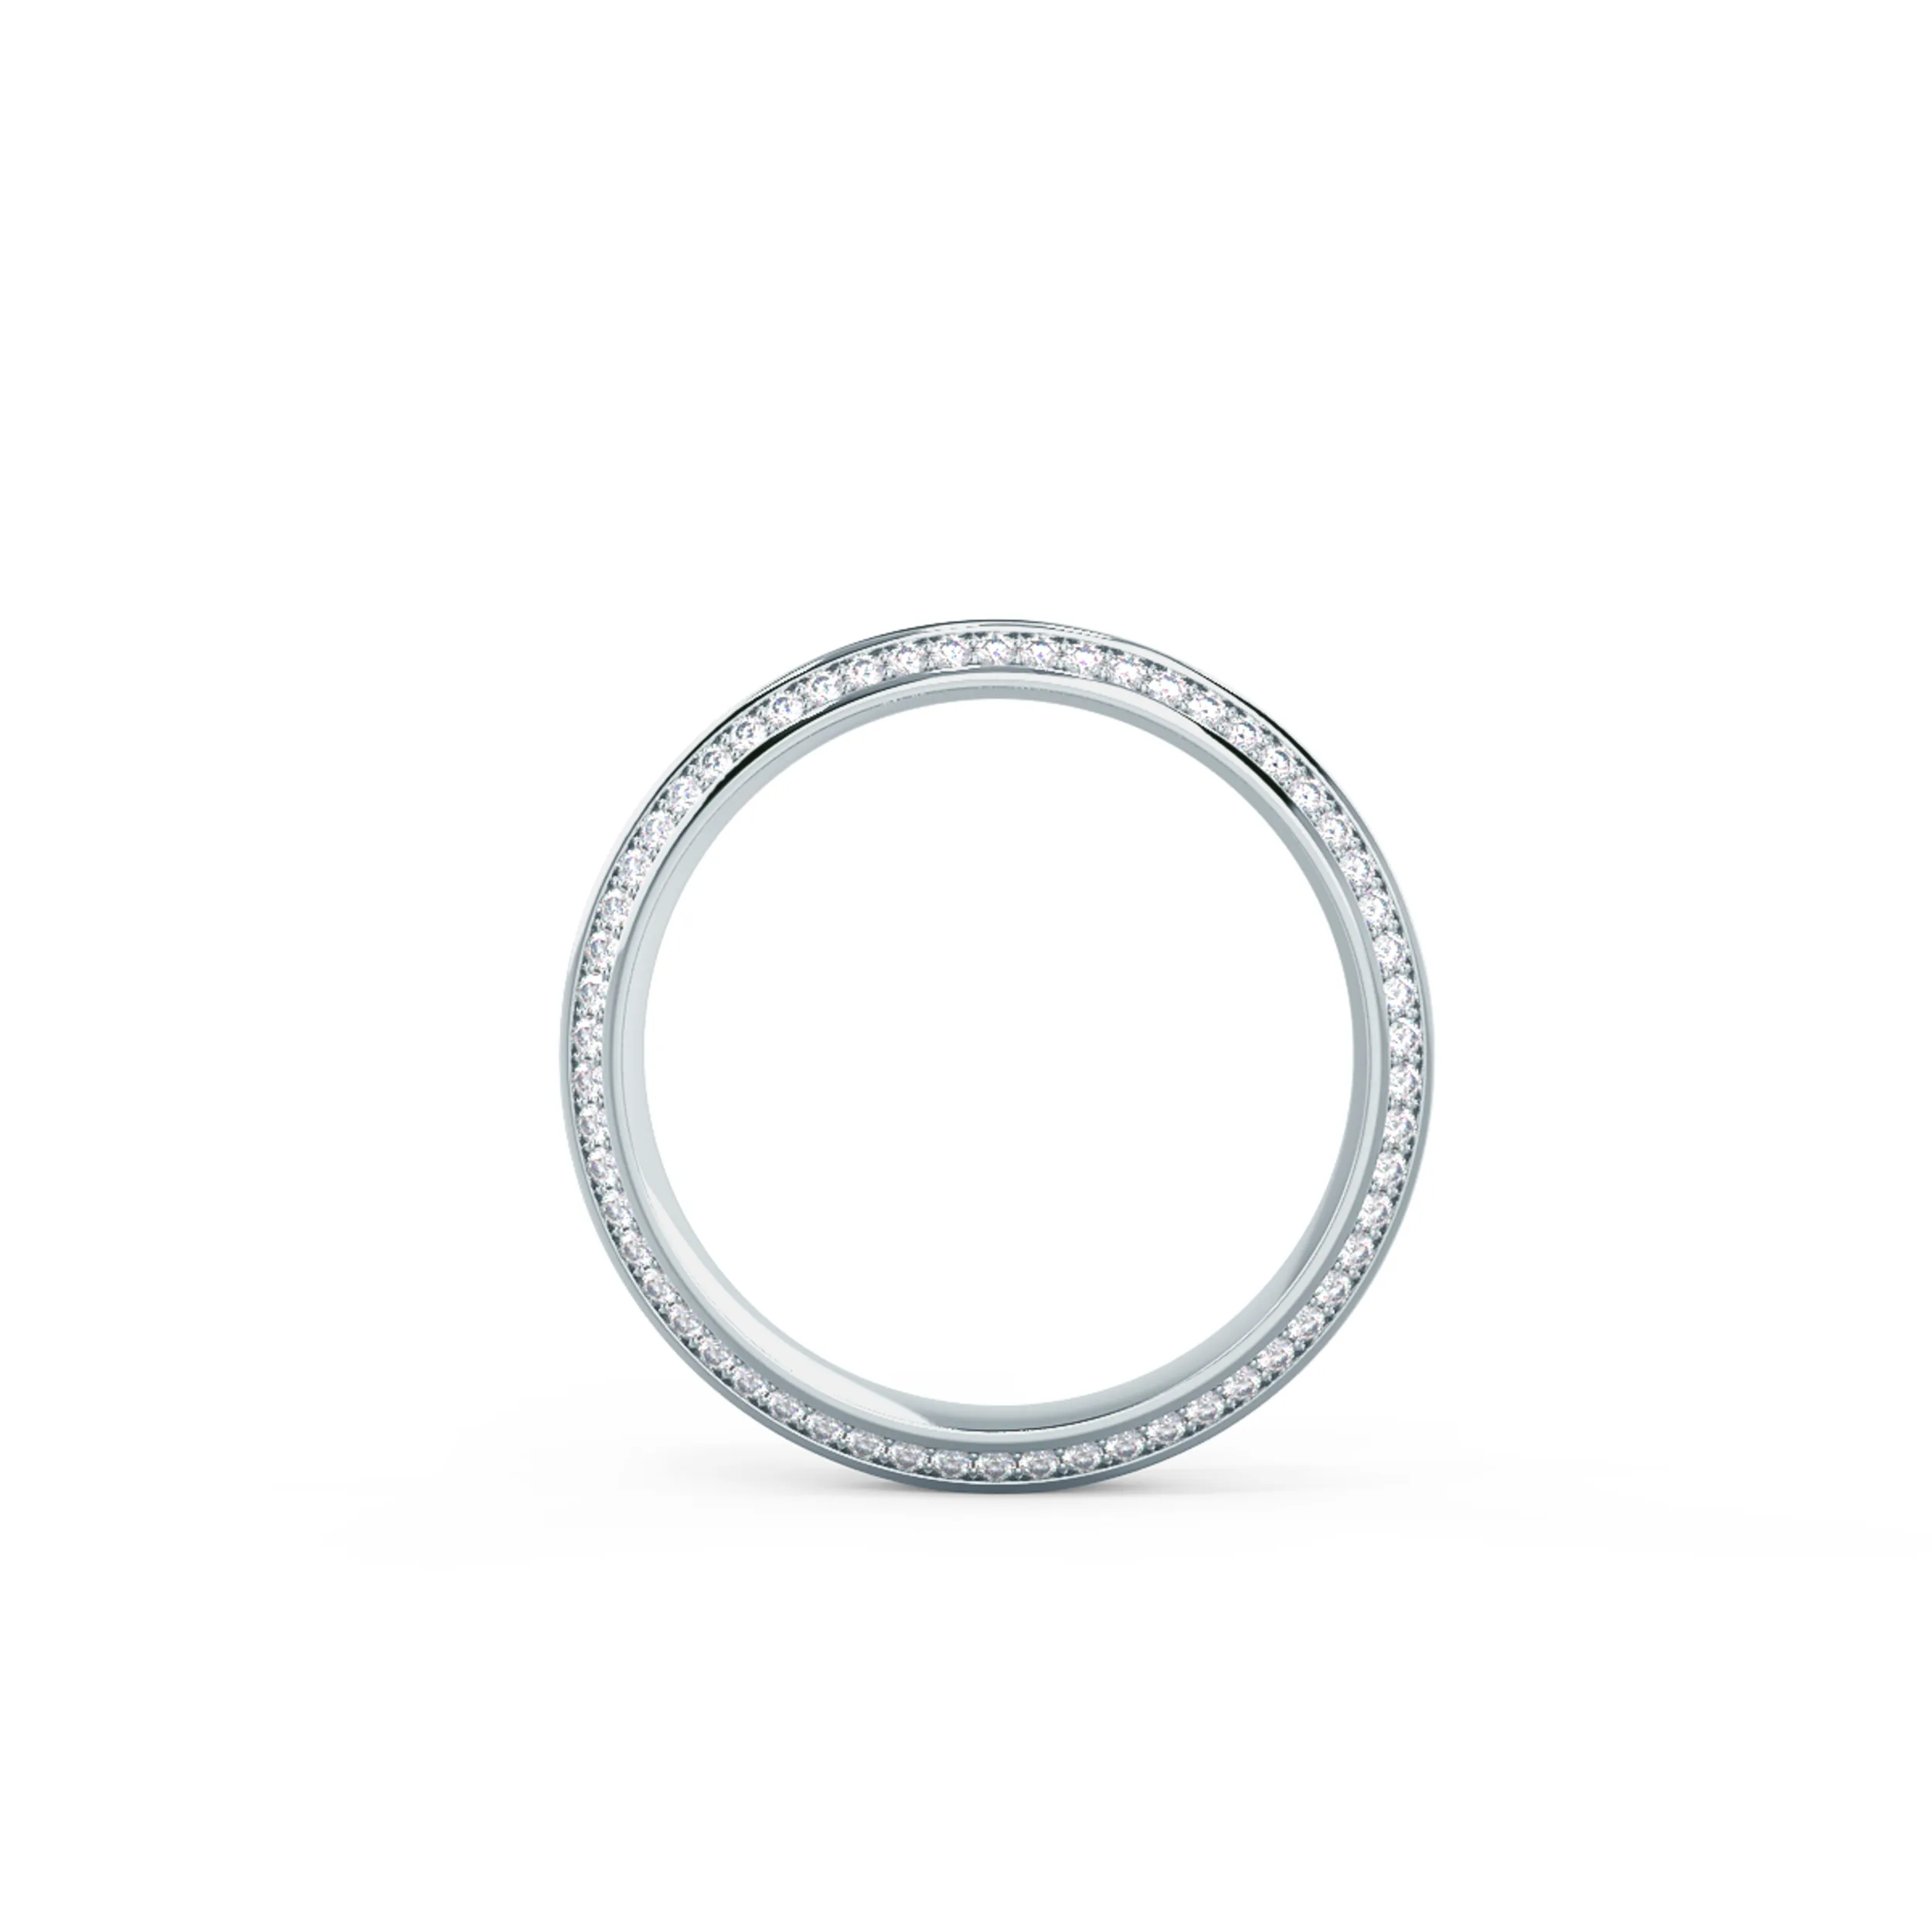 18kt White Gold Narrow Beveled Channel Eternity Band featuring 0.4 Carat Round Brilliant Lab Grown Diamonds (Profile View)